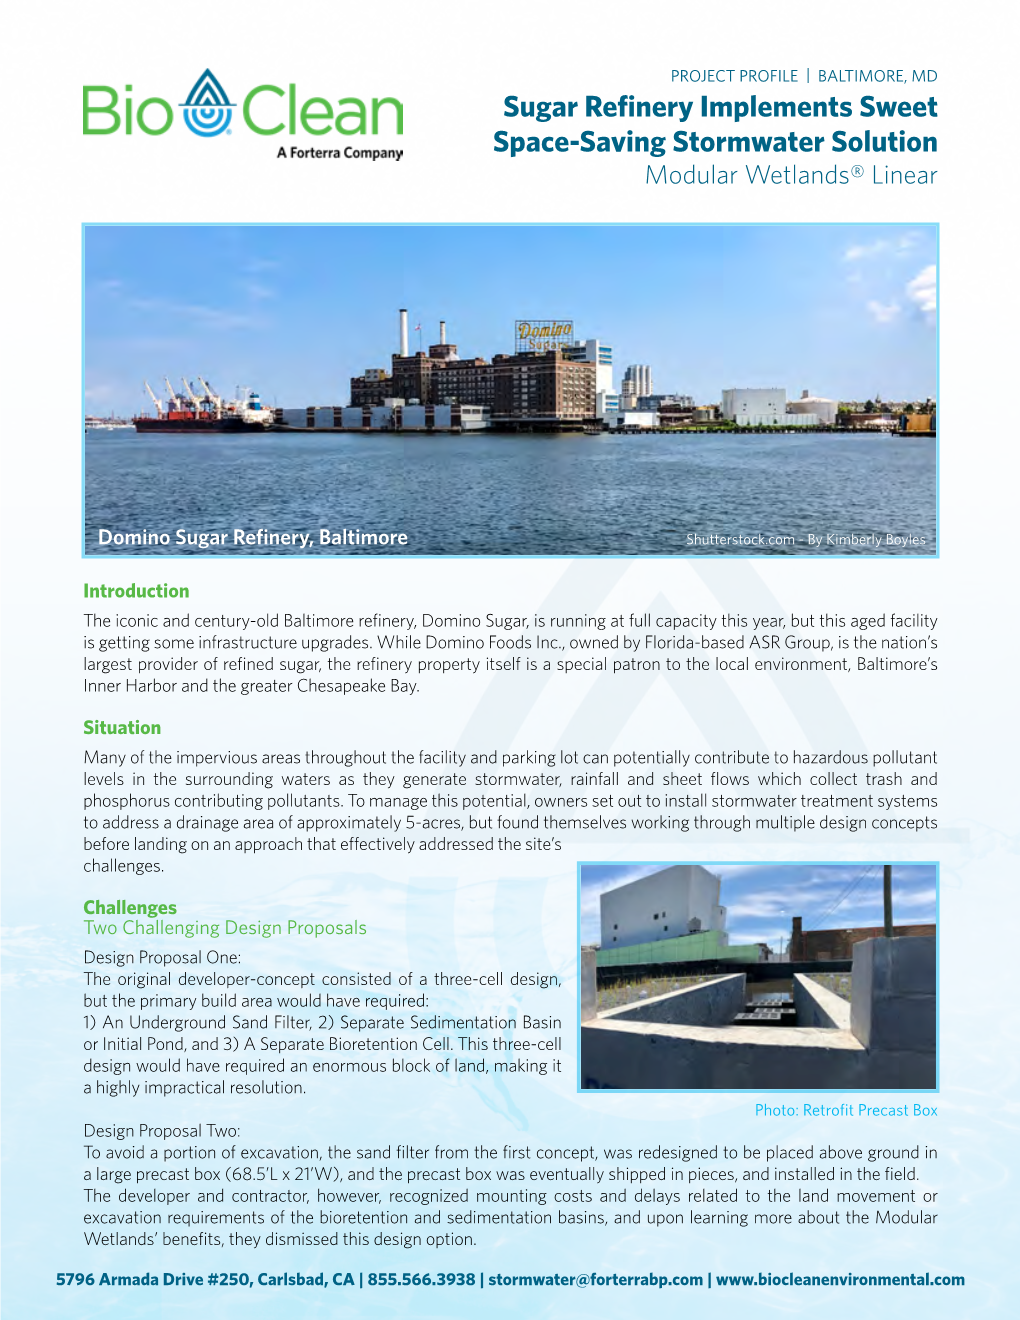 Sugar Refinery Implements Sweet Space-Saving Stormwater Solution Modular Wetlands® Linear